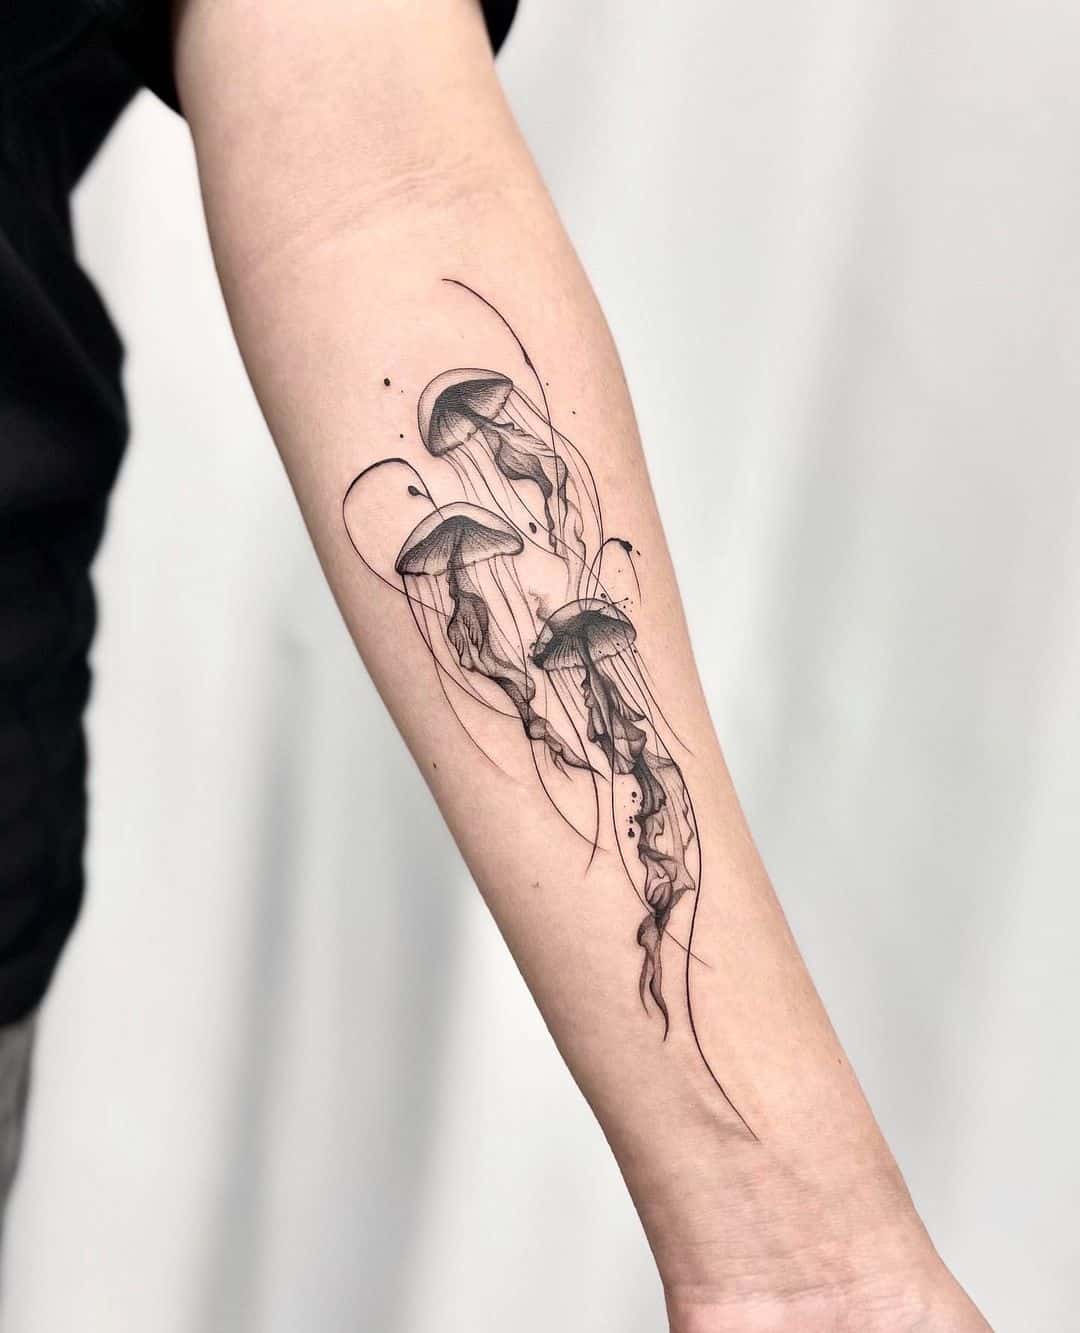 Fine line jellyfish tattoo located on the forearm.